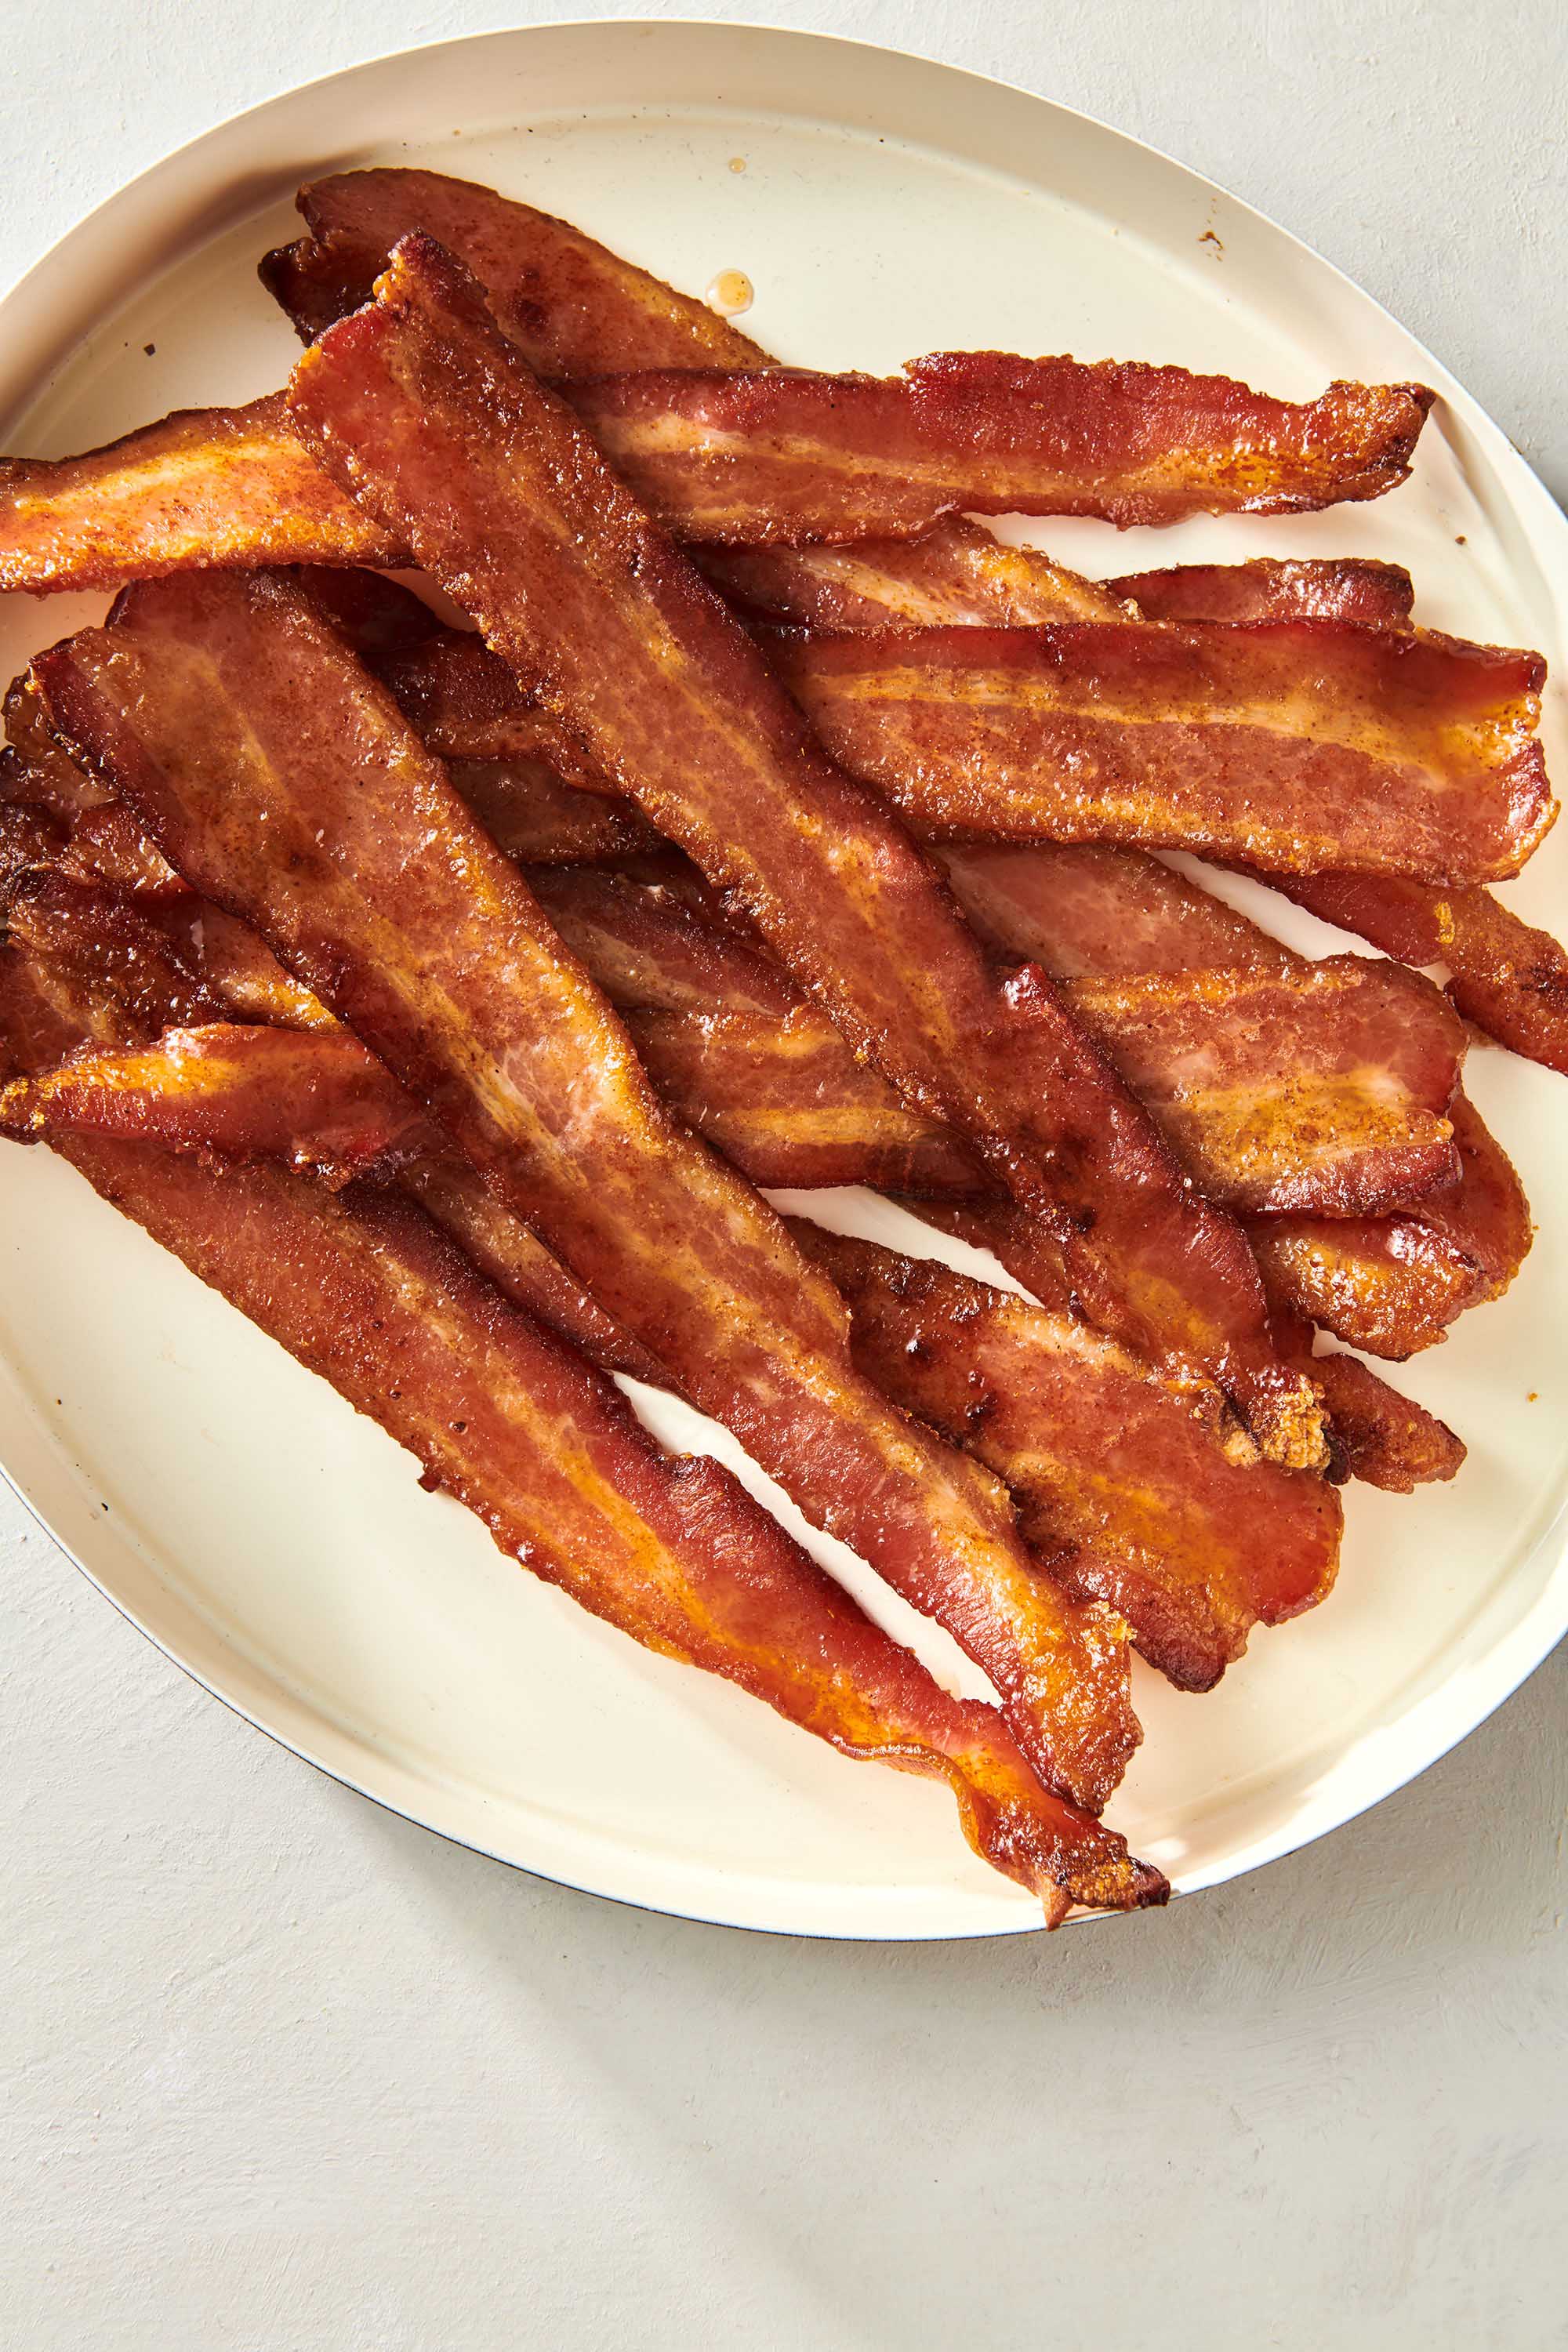 Slices of Candied Bacon piled on a plate.